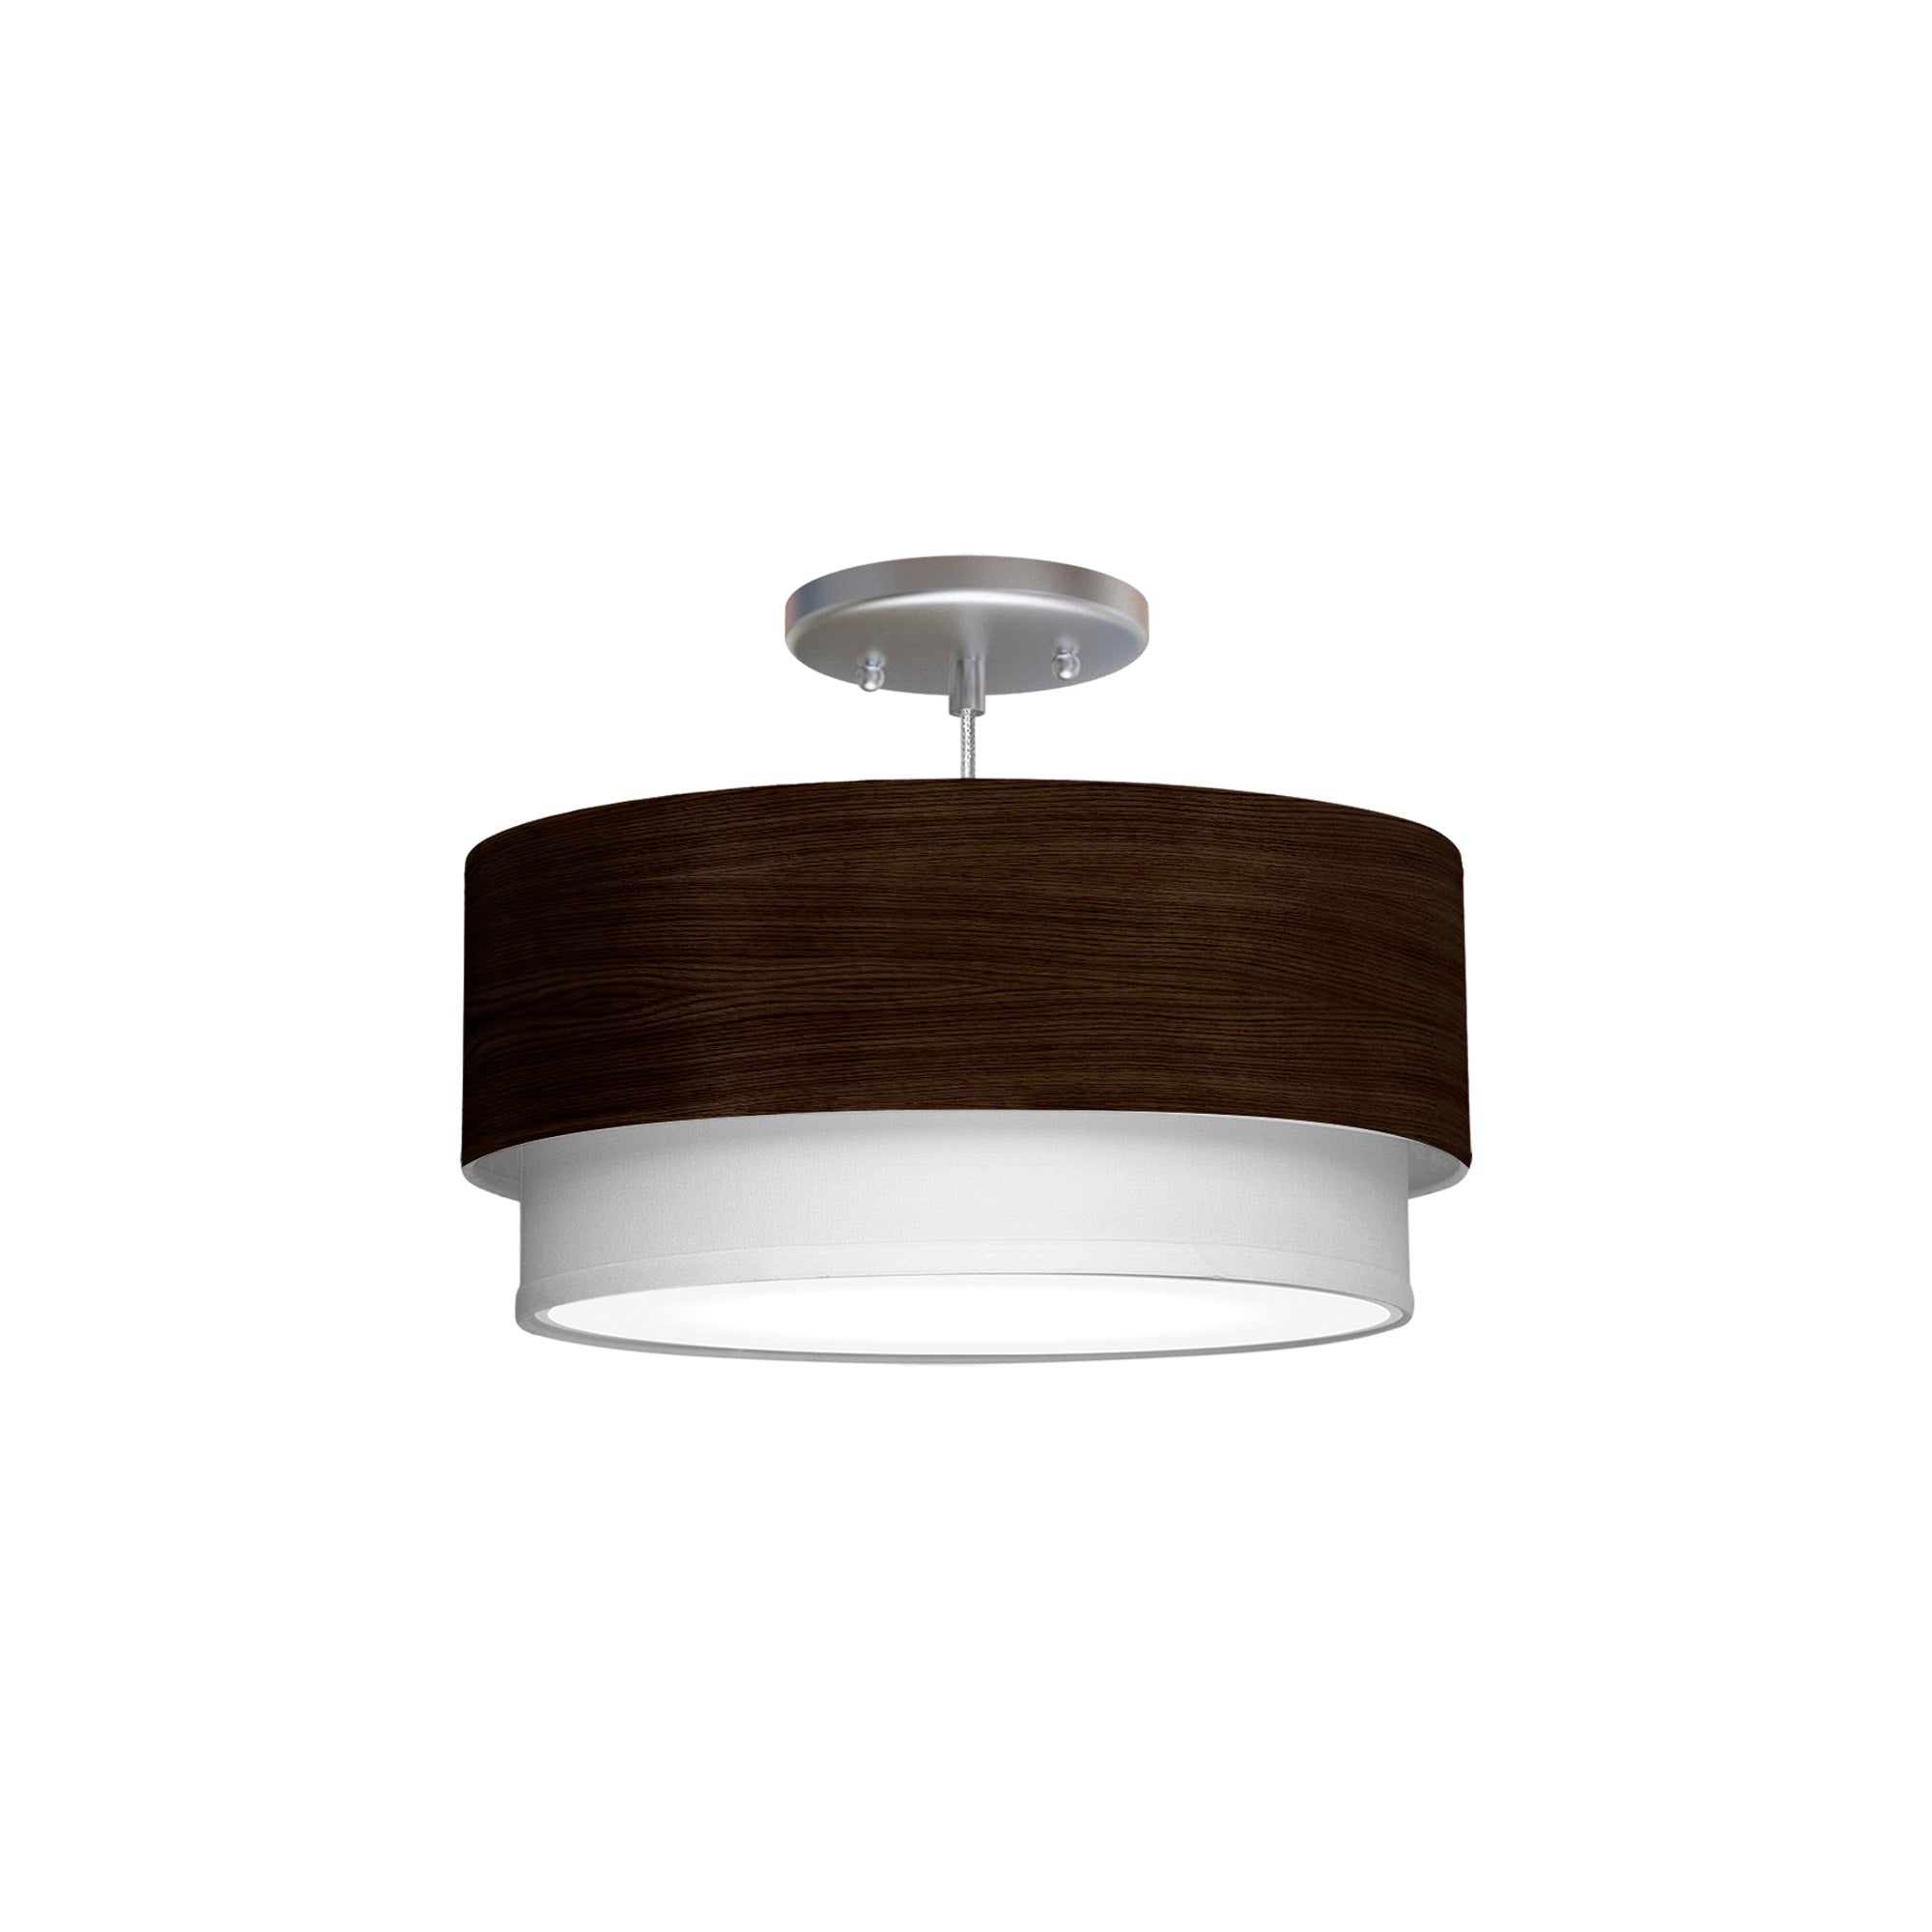 The Lenny Hanging Lamp from Seascape Fixtures with a photo veneer shade in chocolate color.